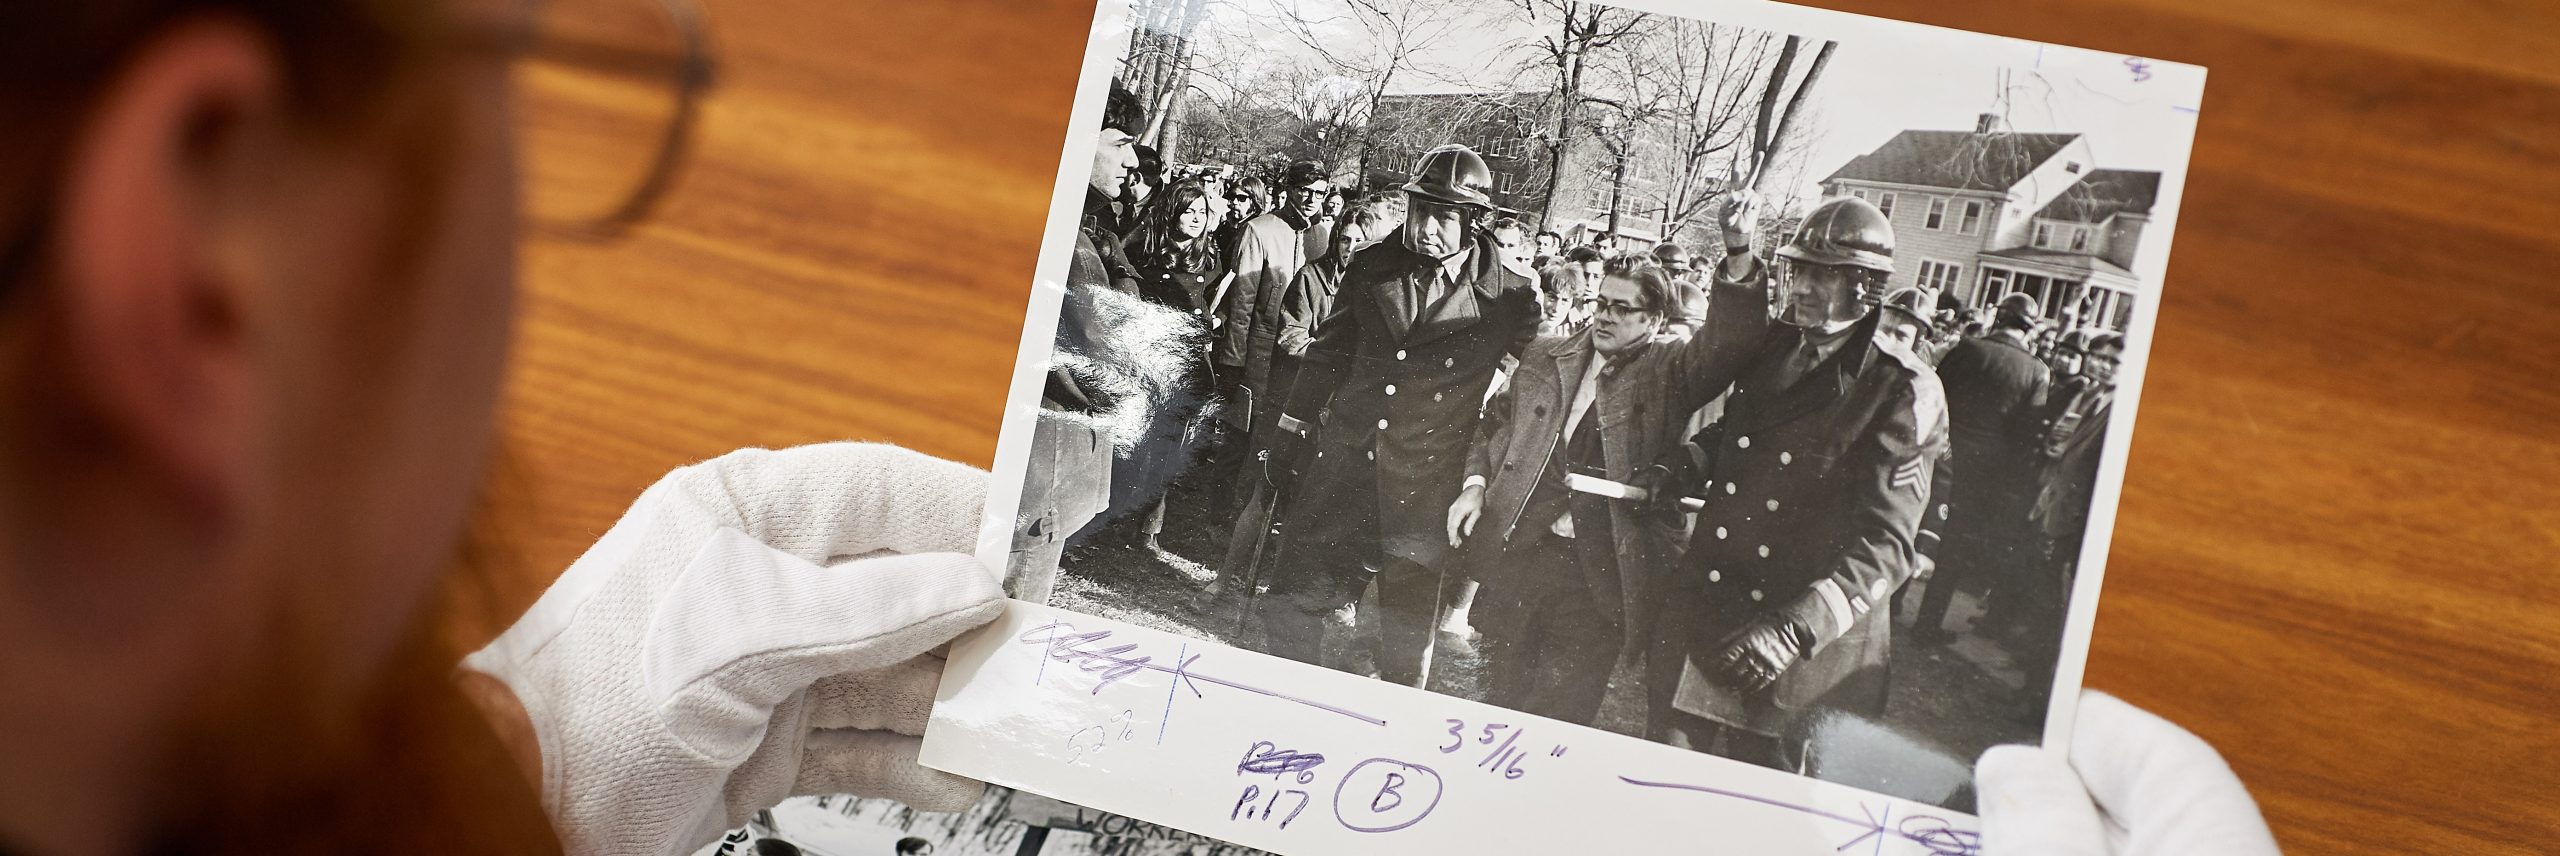 Archivist holding historic photograph of UConn student protest